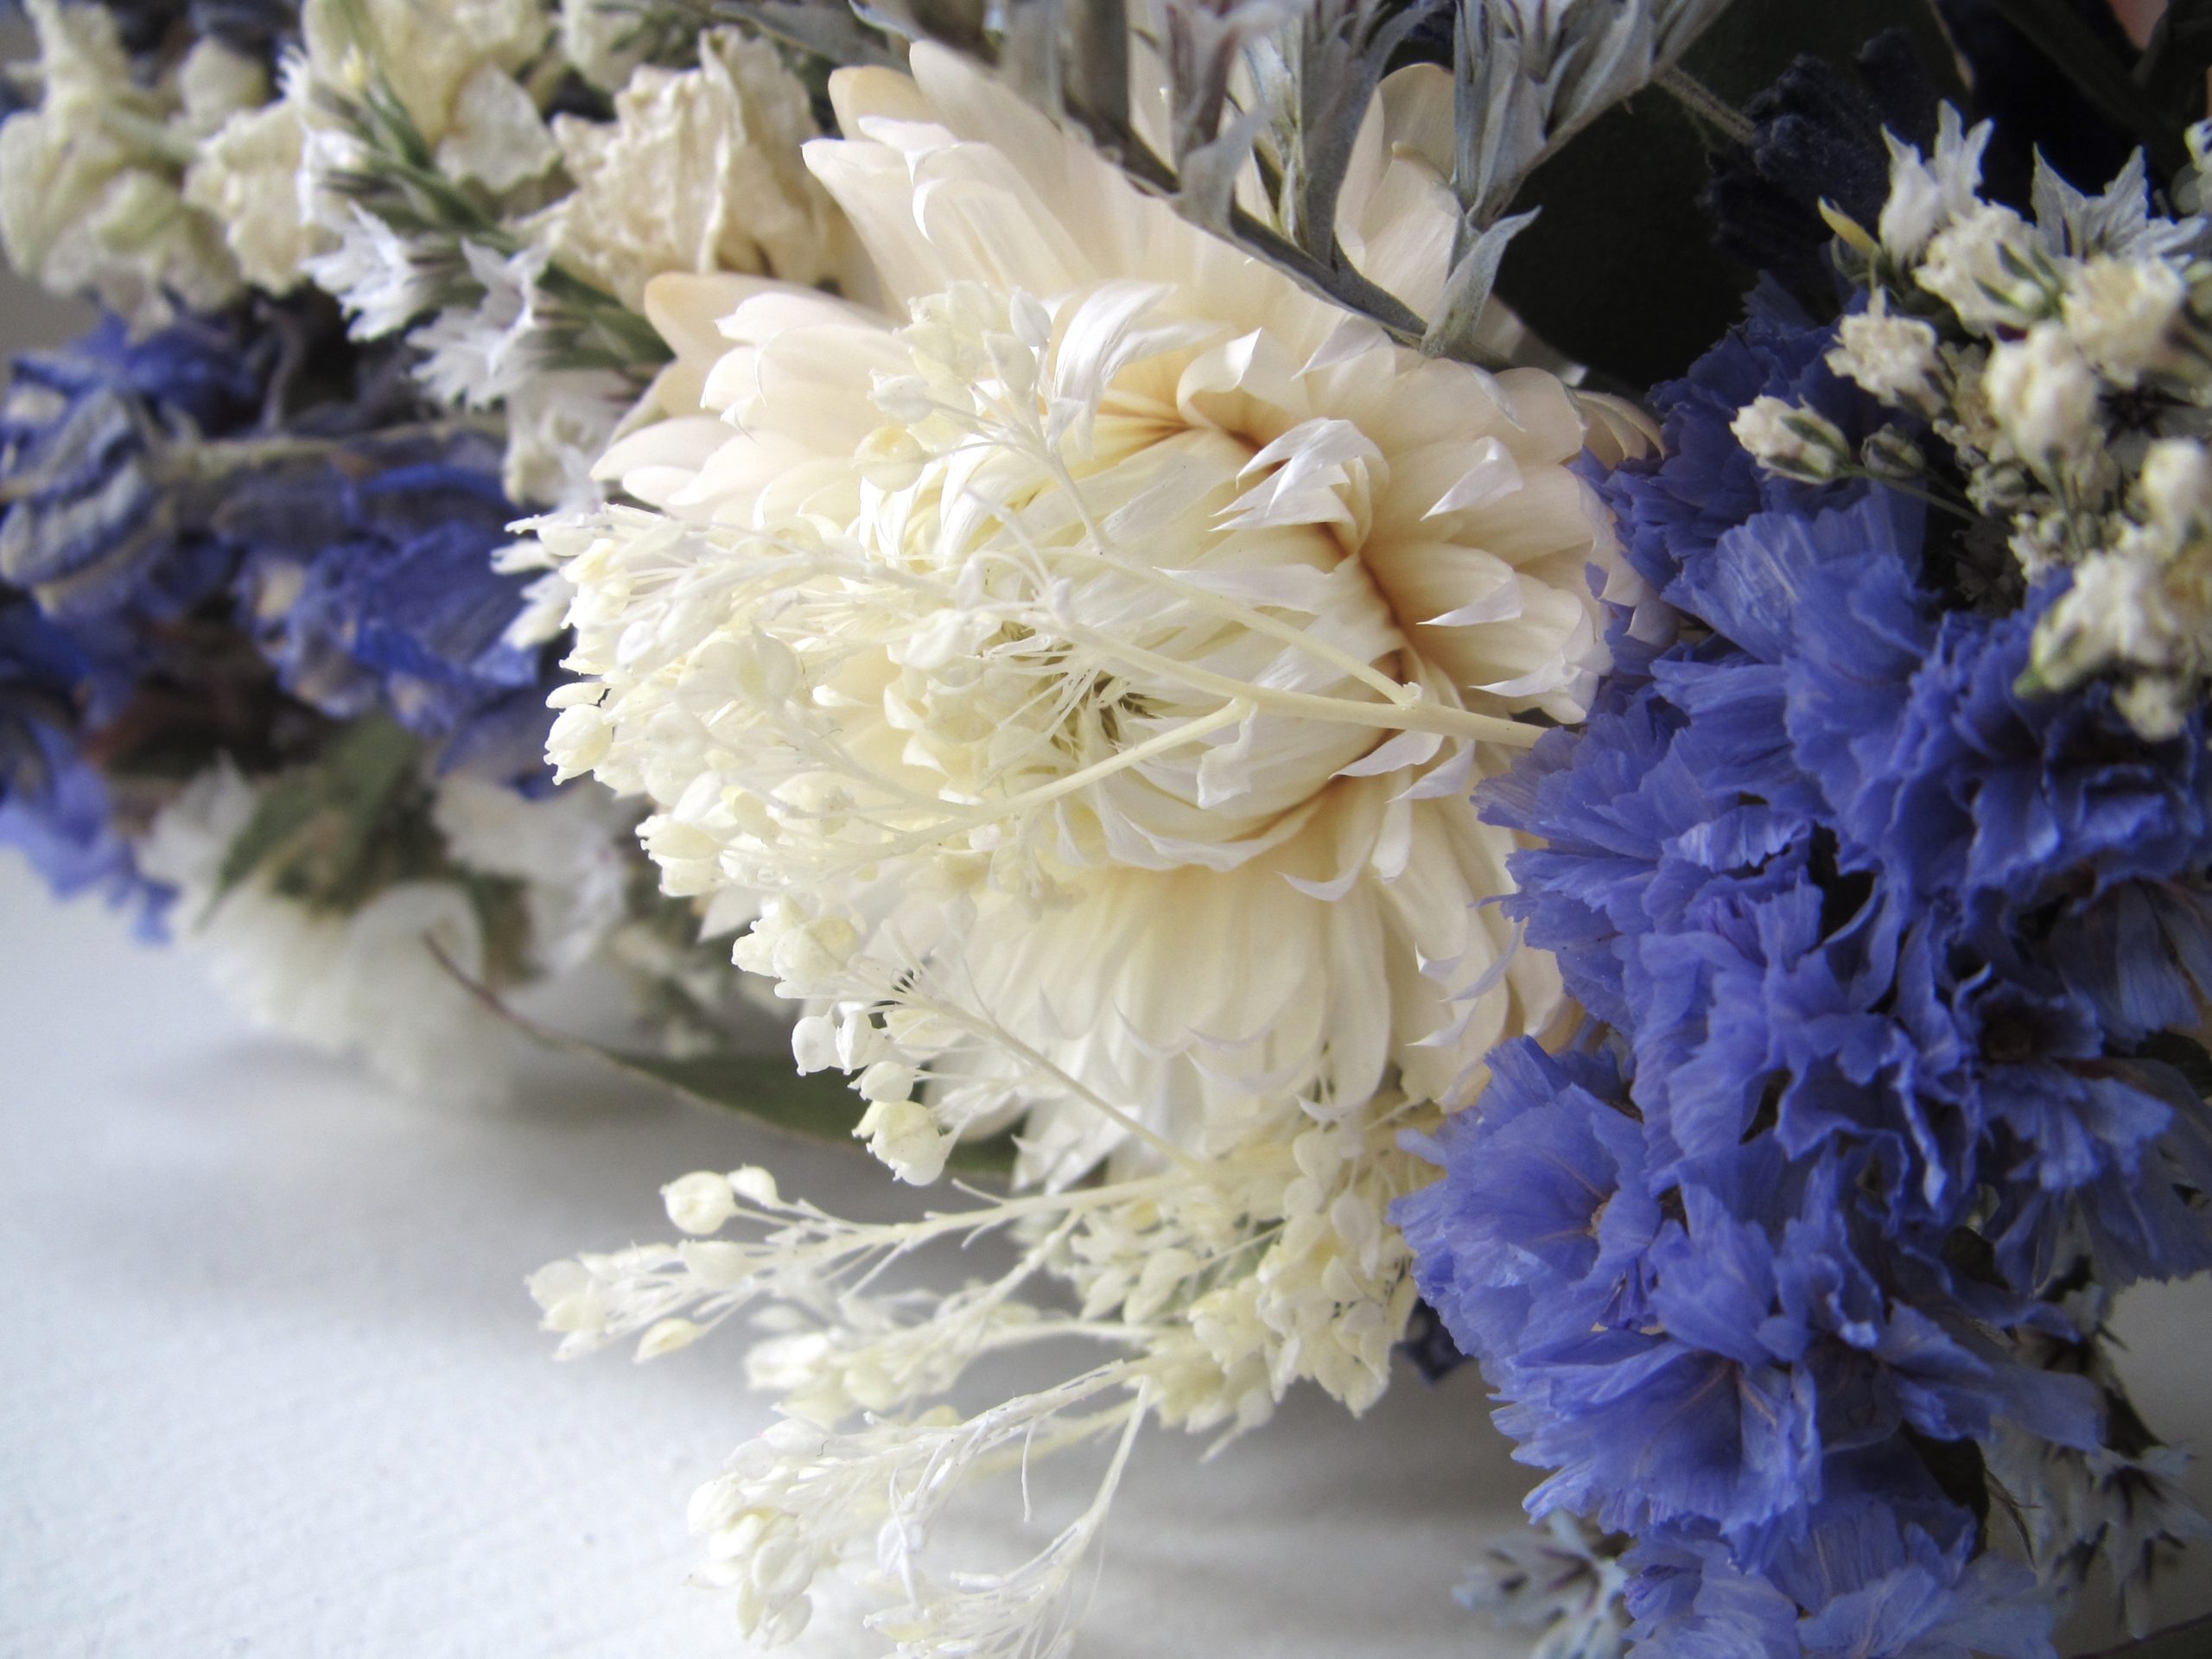 Something Blue Full Flower Crown - The Parsons Wreath Company